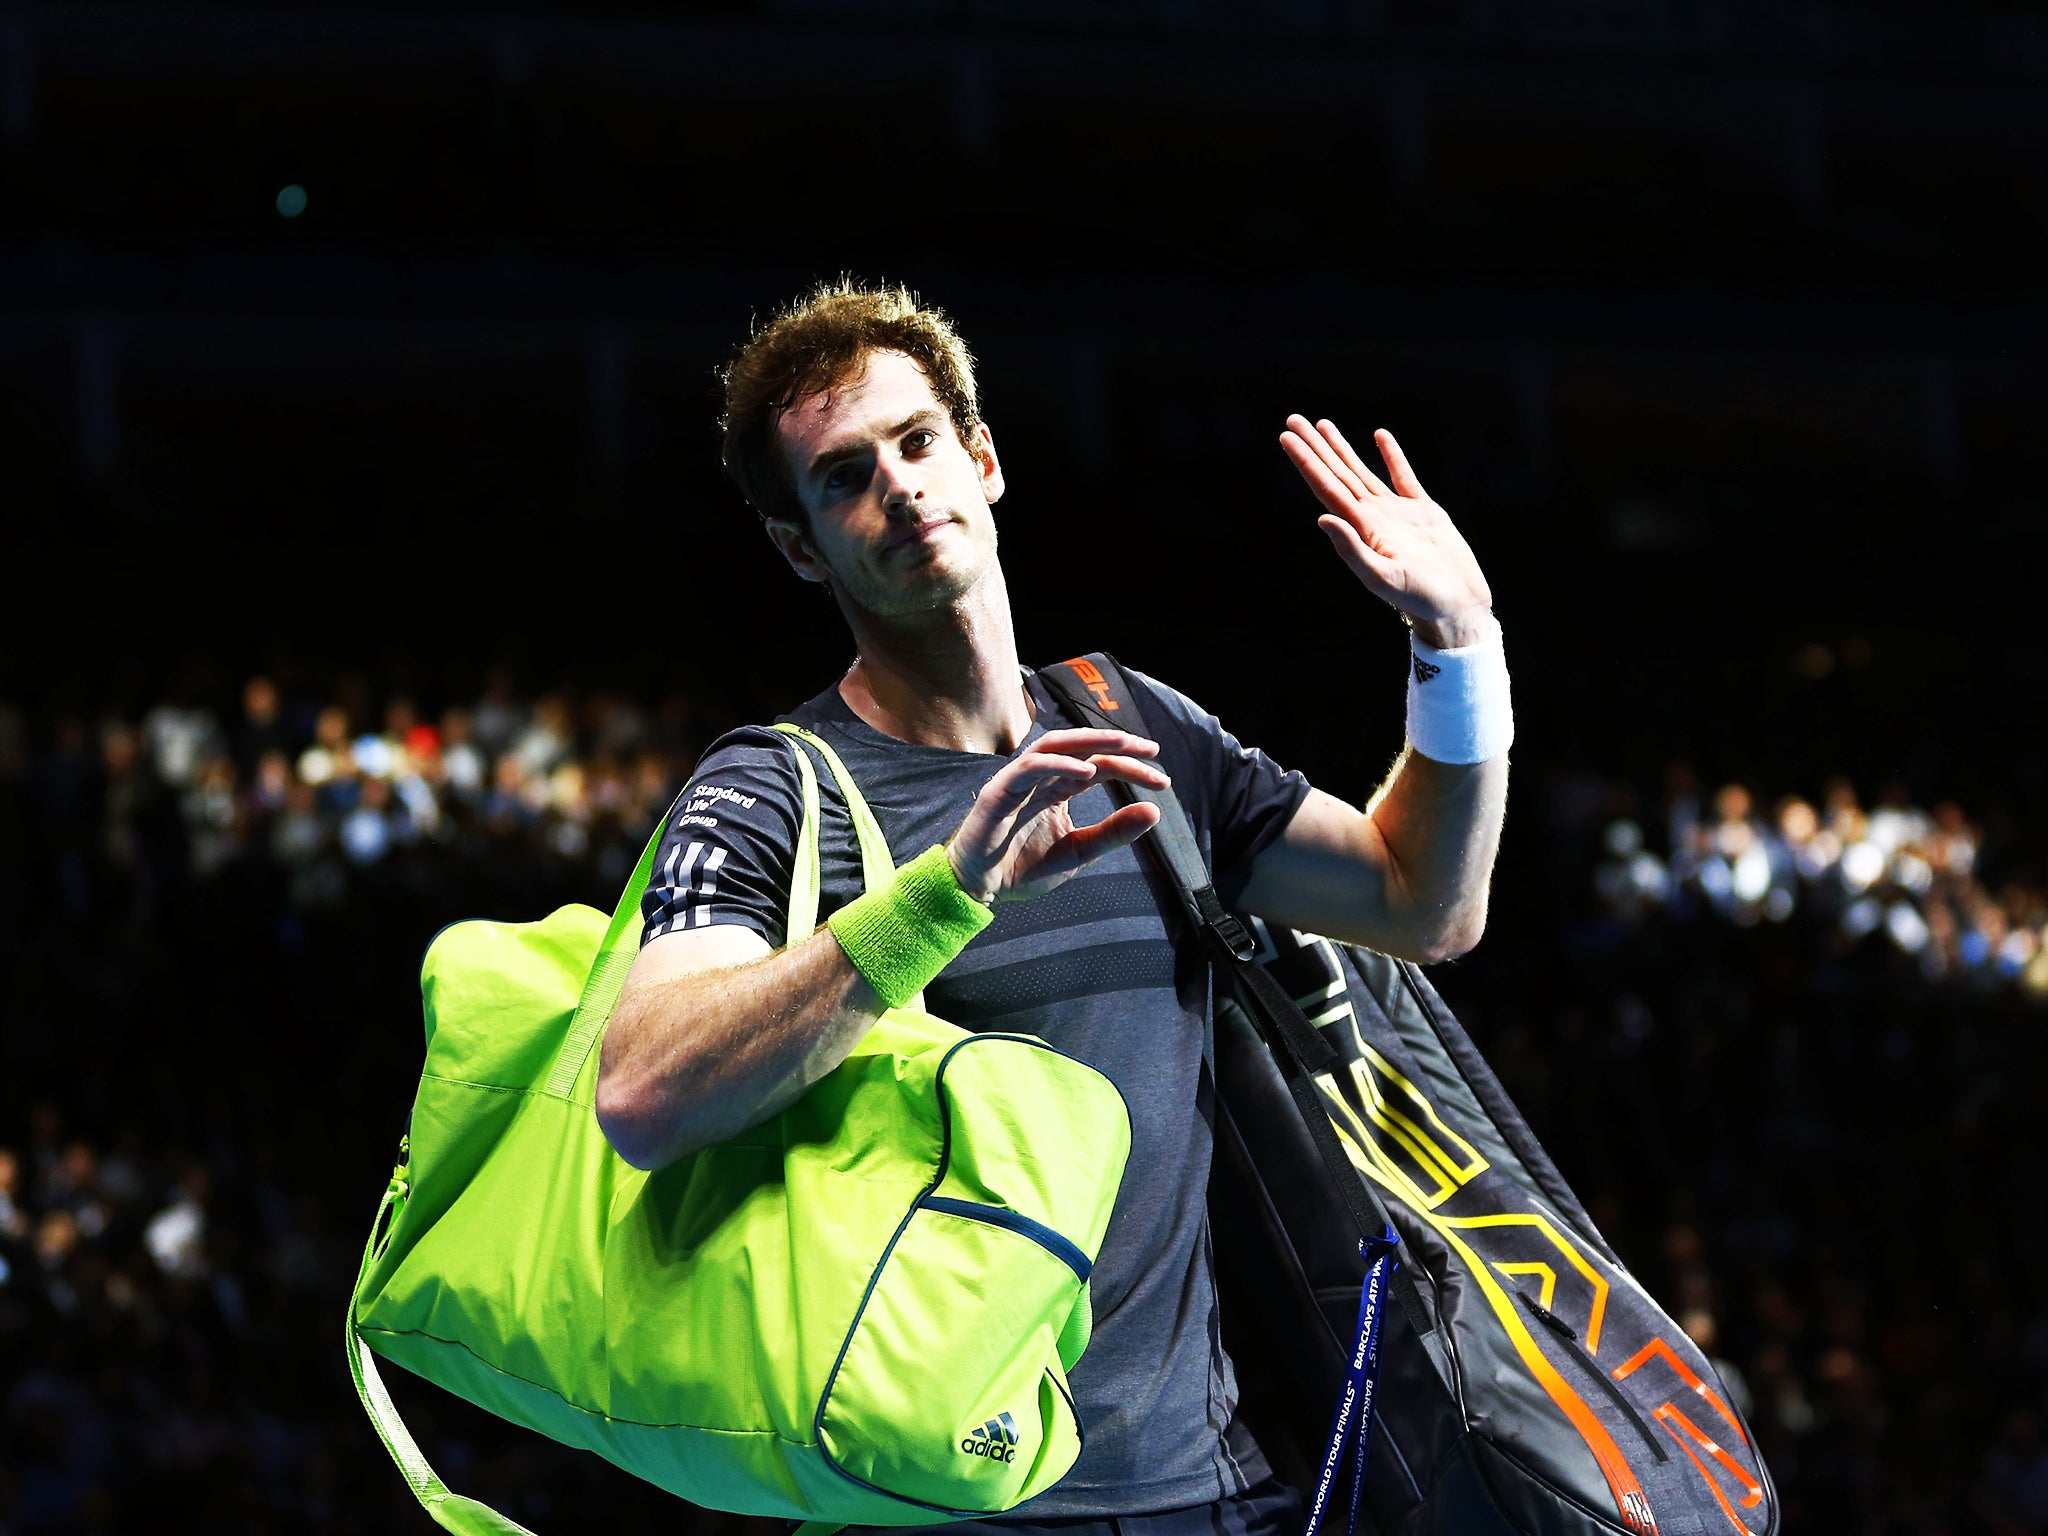 A forlorn Andy Murray after being thrashed by Roger Federer at the 02 Arena
yesterday